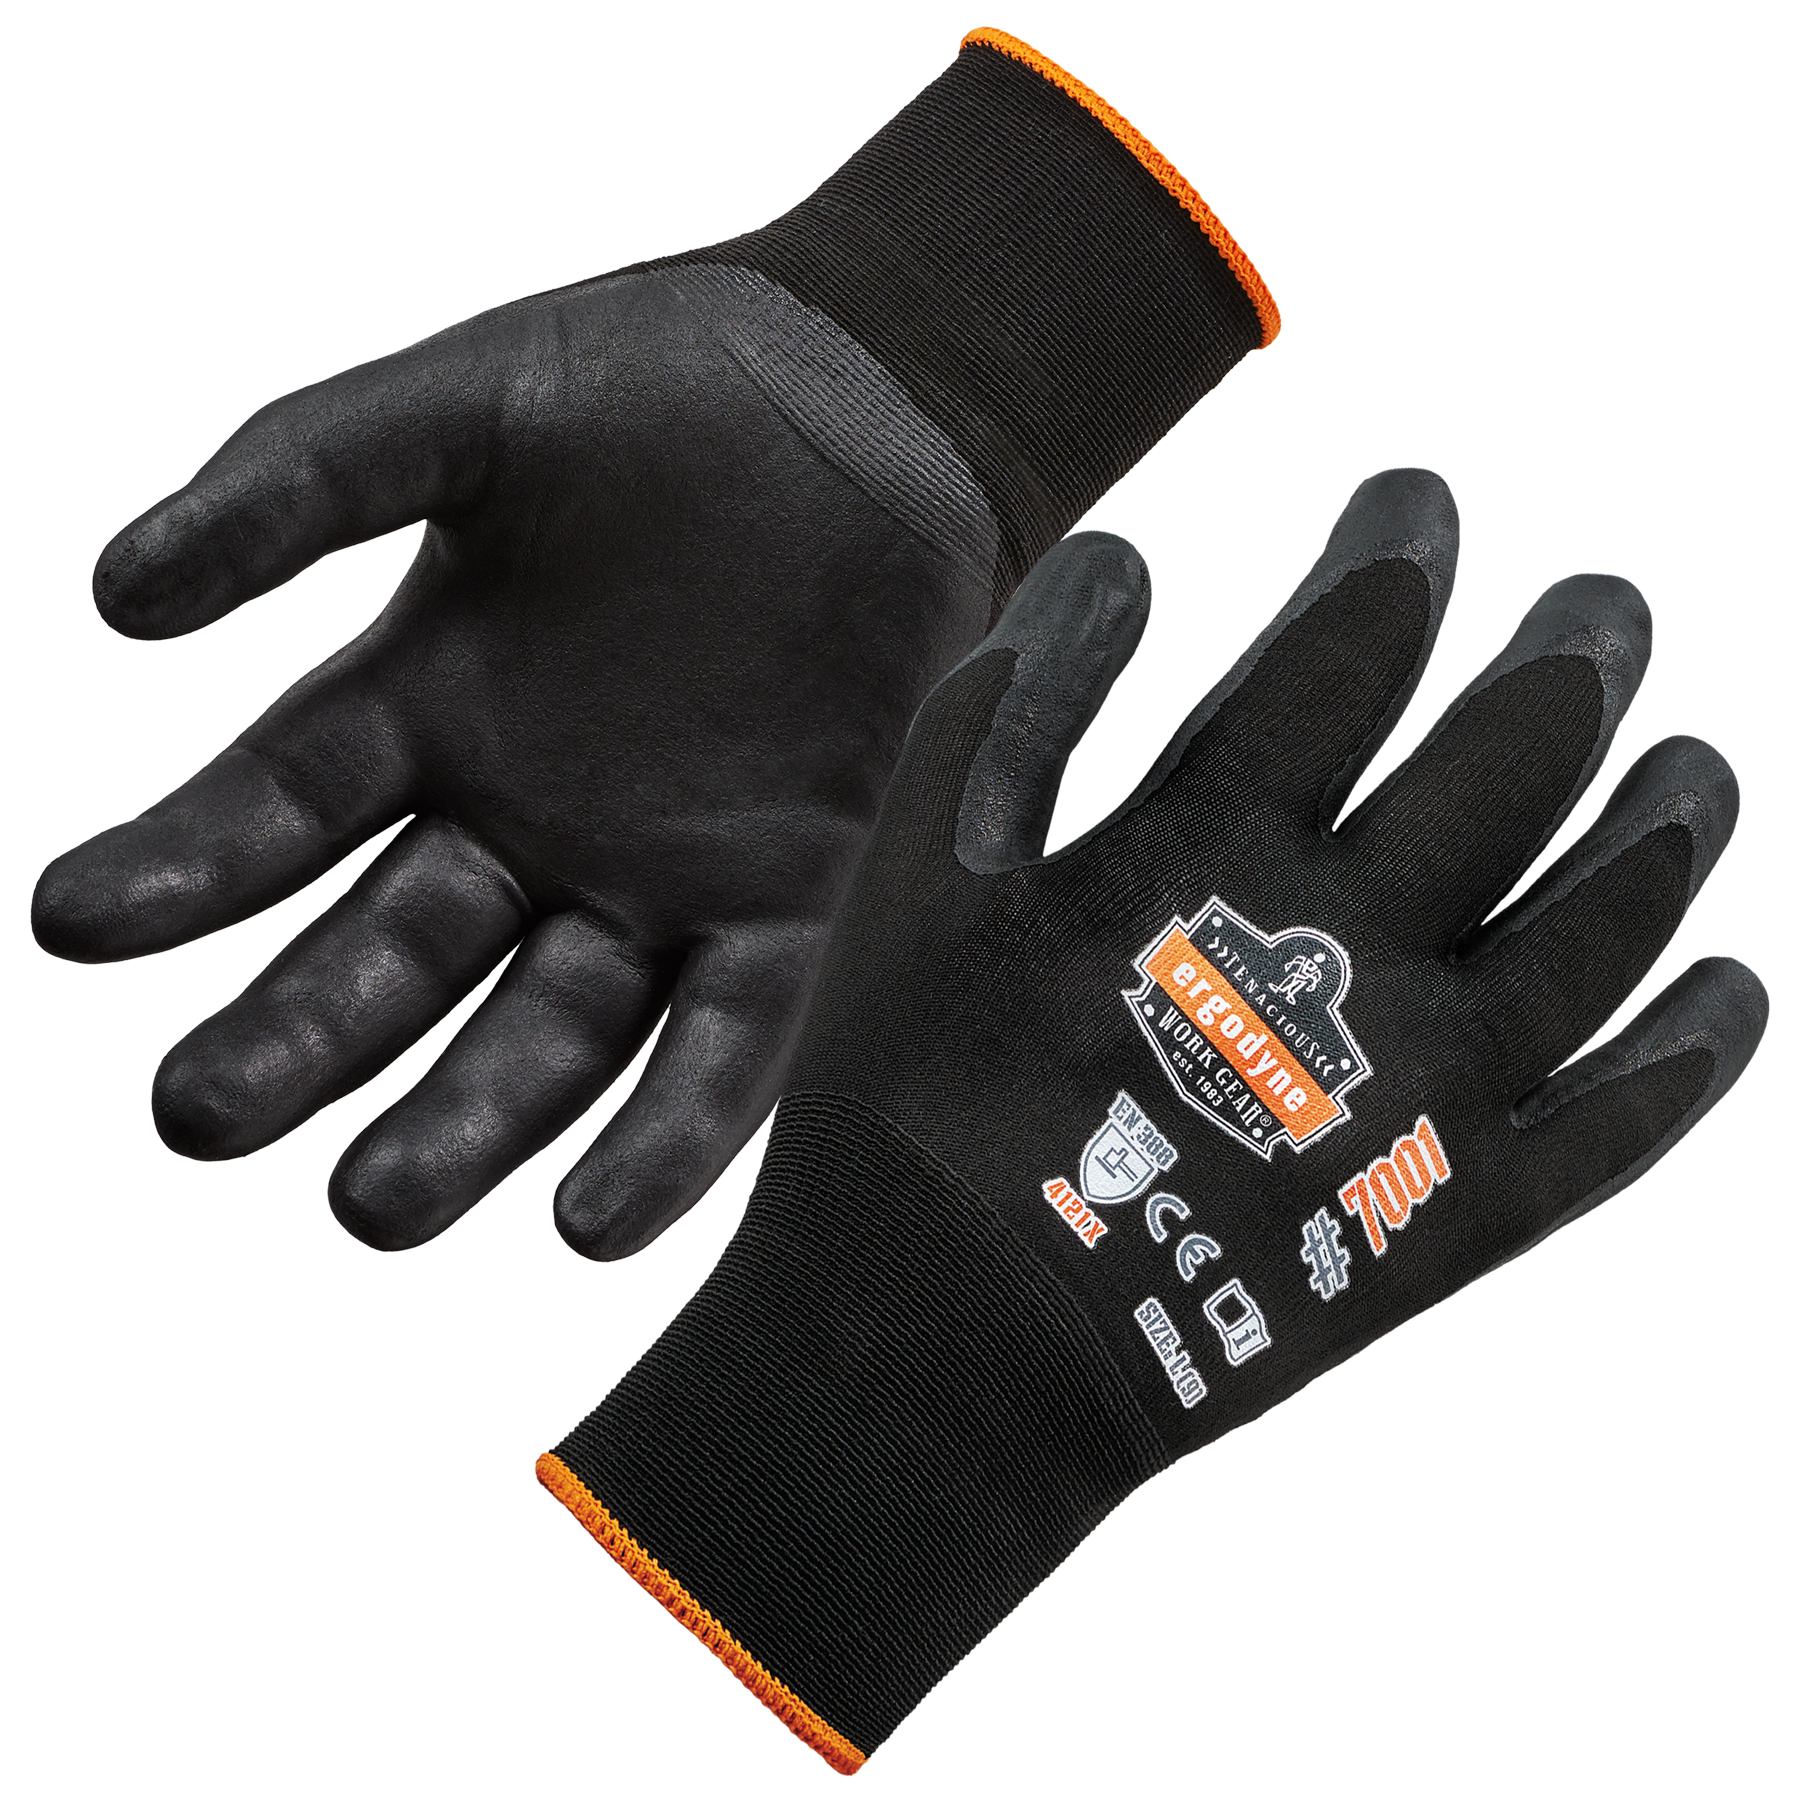 Nitrile Dipped Industrial Nylon Work Gloves, Cut/Abrasion Resistant